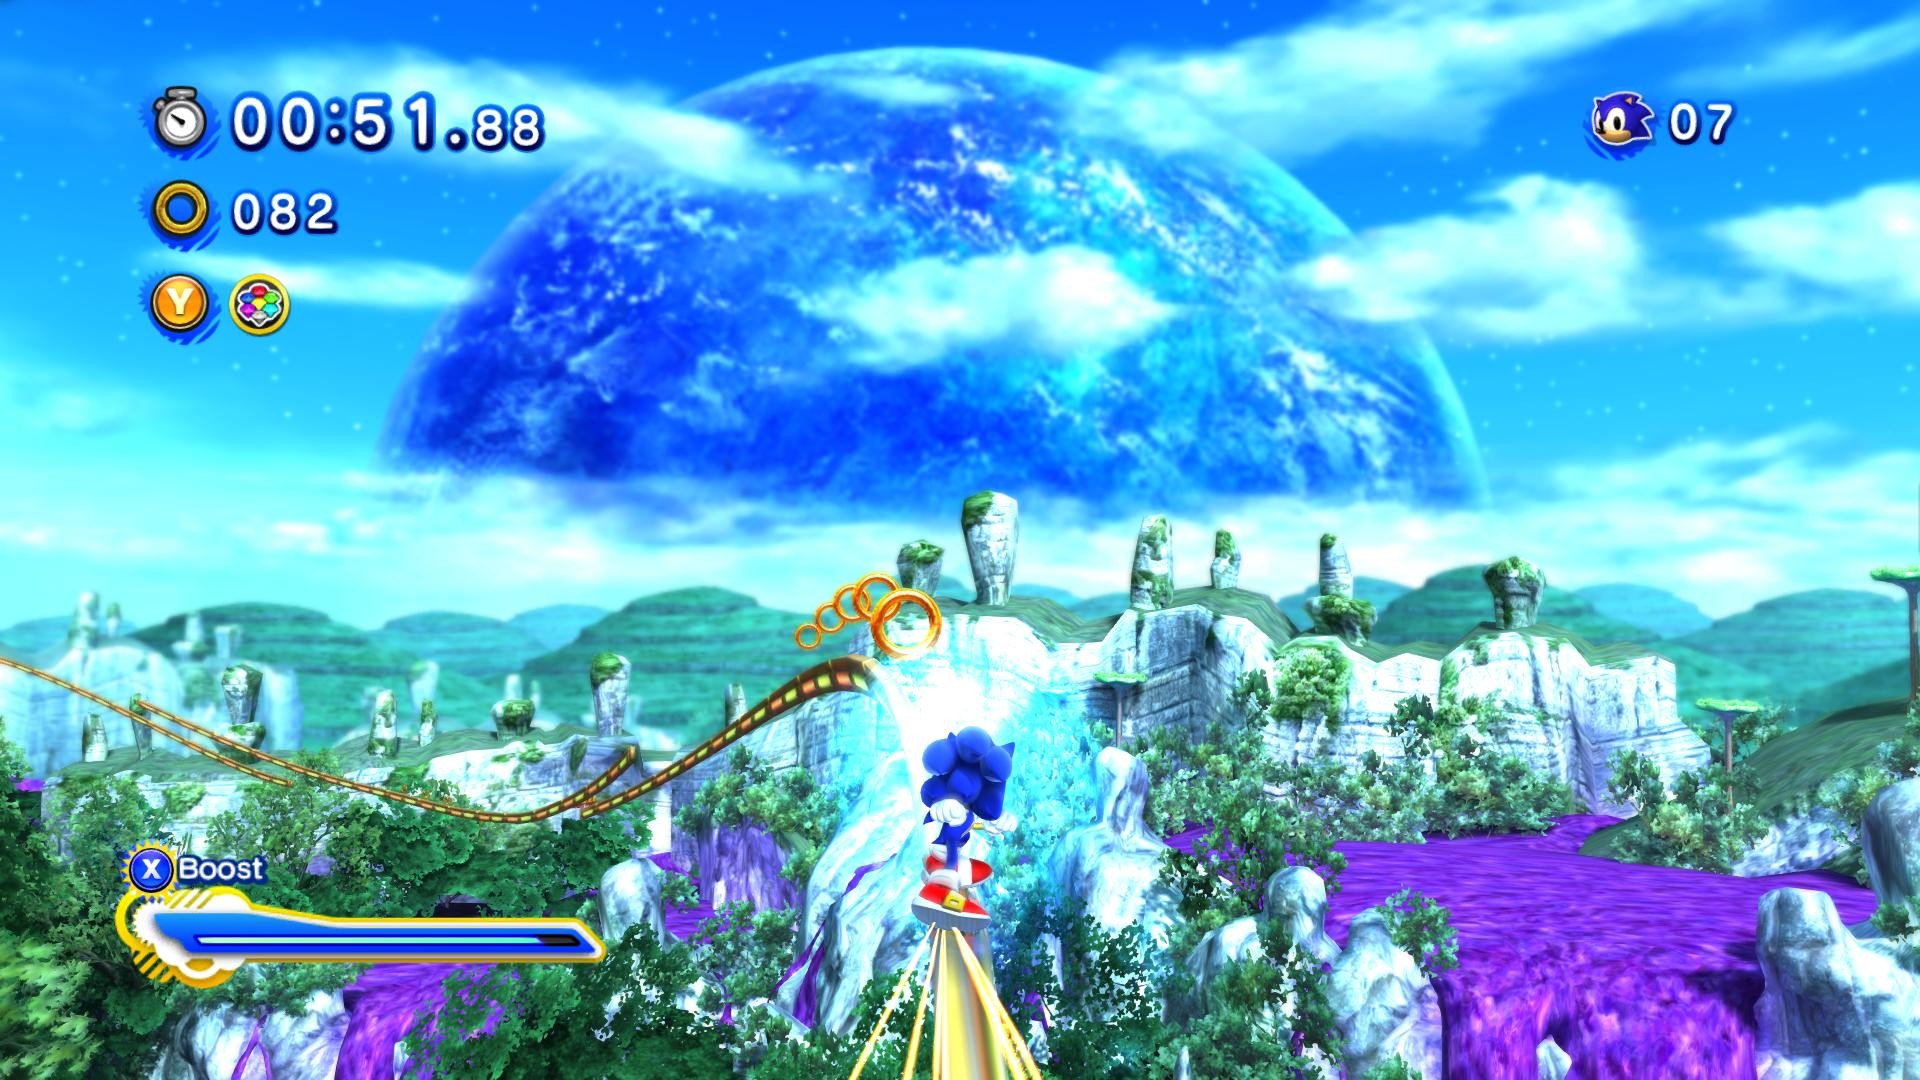 1920x1080 Review: Sonic Generations (360, PS3, PC version) Â» Sonic Generations 007